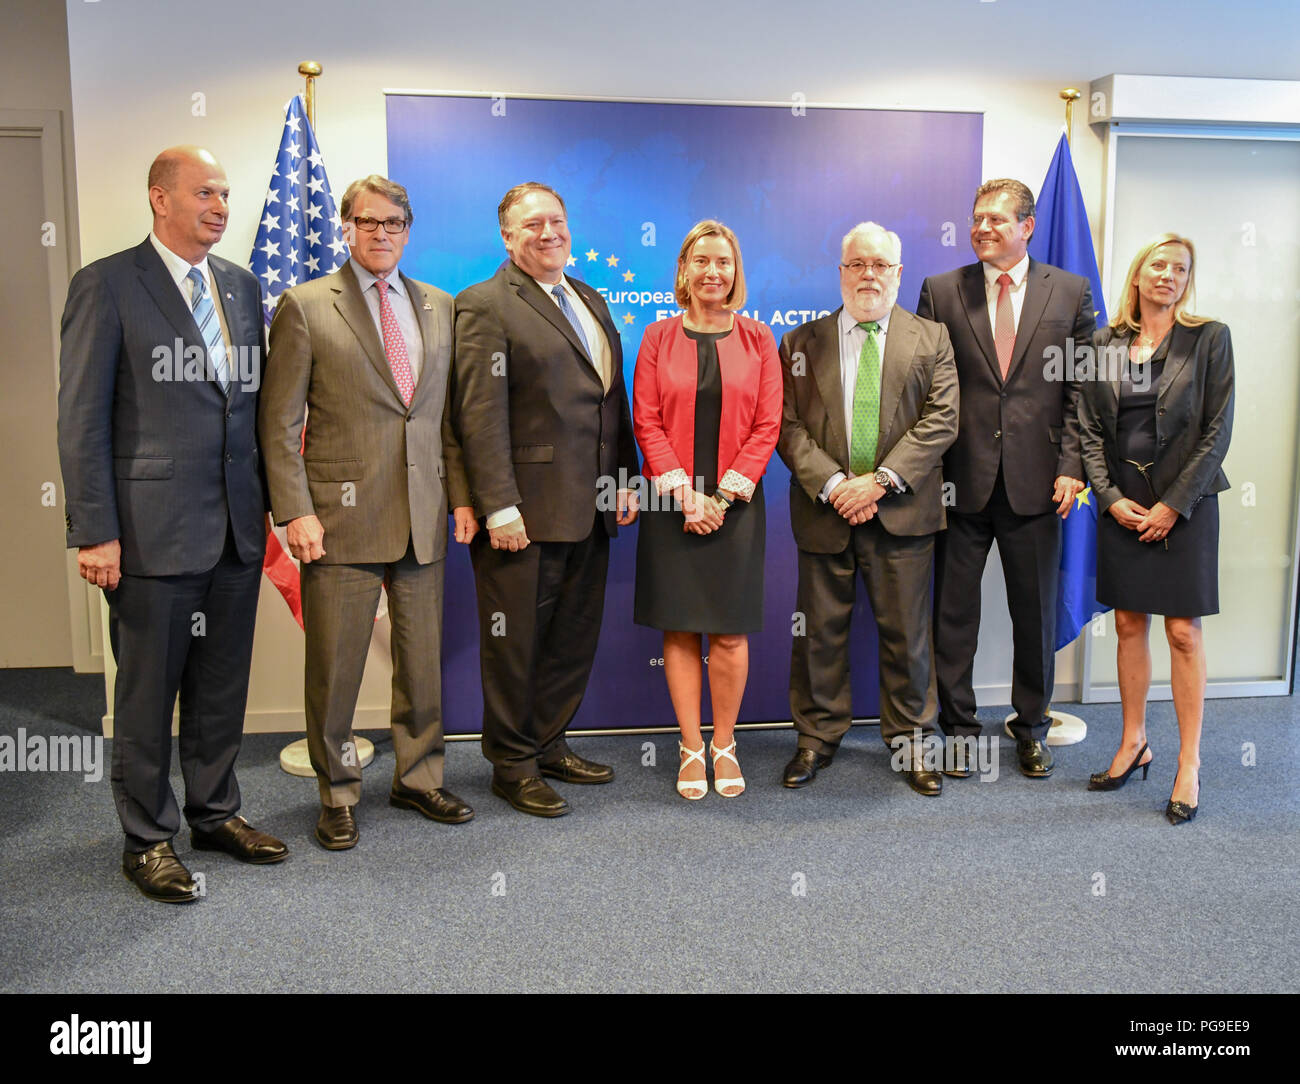 U.S. Secretary of State Michael R. Pompeo poses for a photo with U.S. Secretary of Energy Rick Perry, Assistant Secretary for the Bureau of Energy Resources Francis Fannon and U.S. Representative to the European Union Federica Mogherini at the United States EU Energy Council meeting in Brussels, Belgium on July 12, 2018. Stock Photo